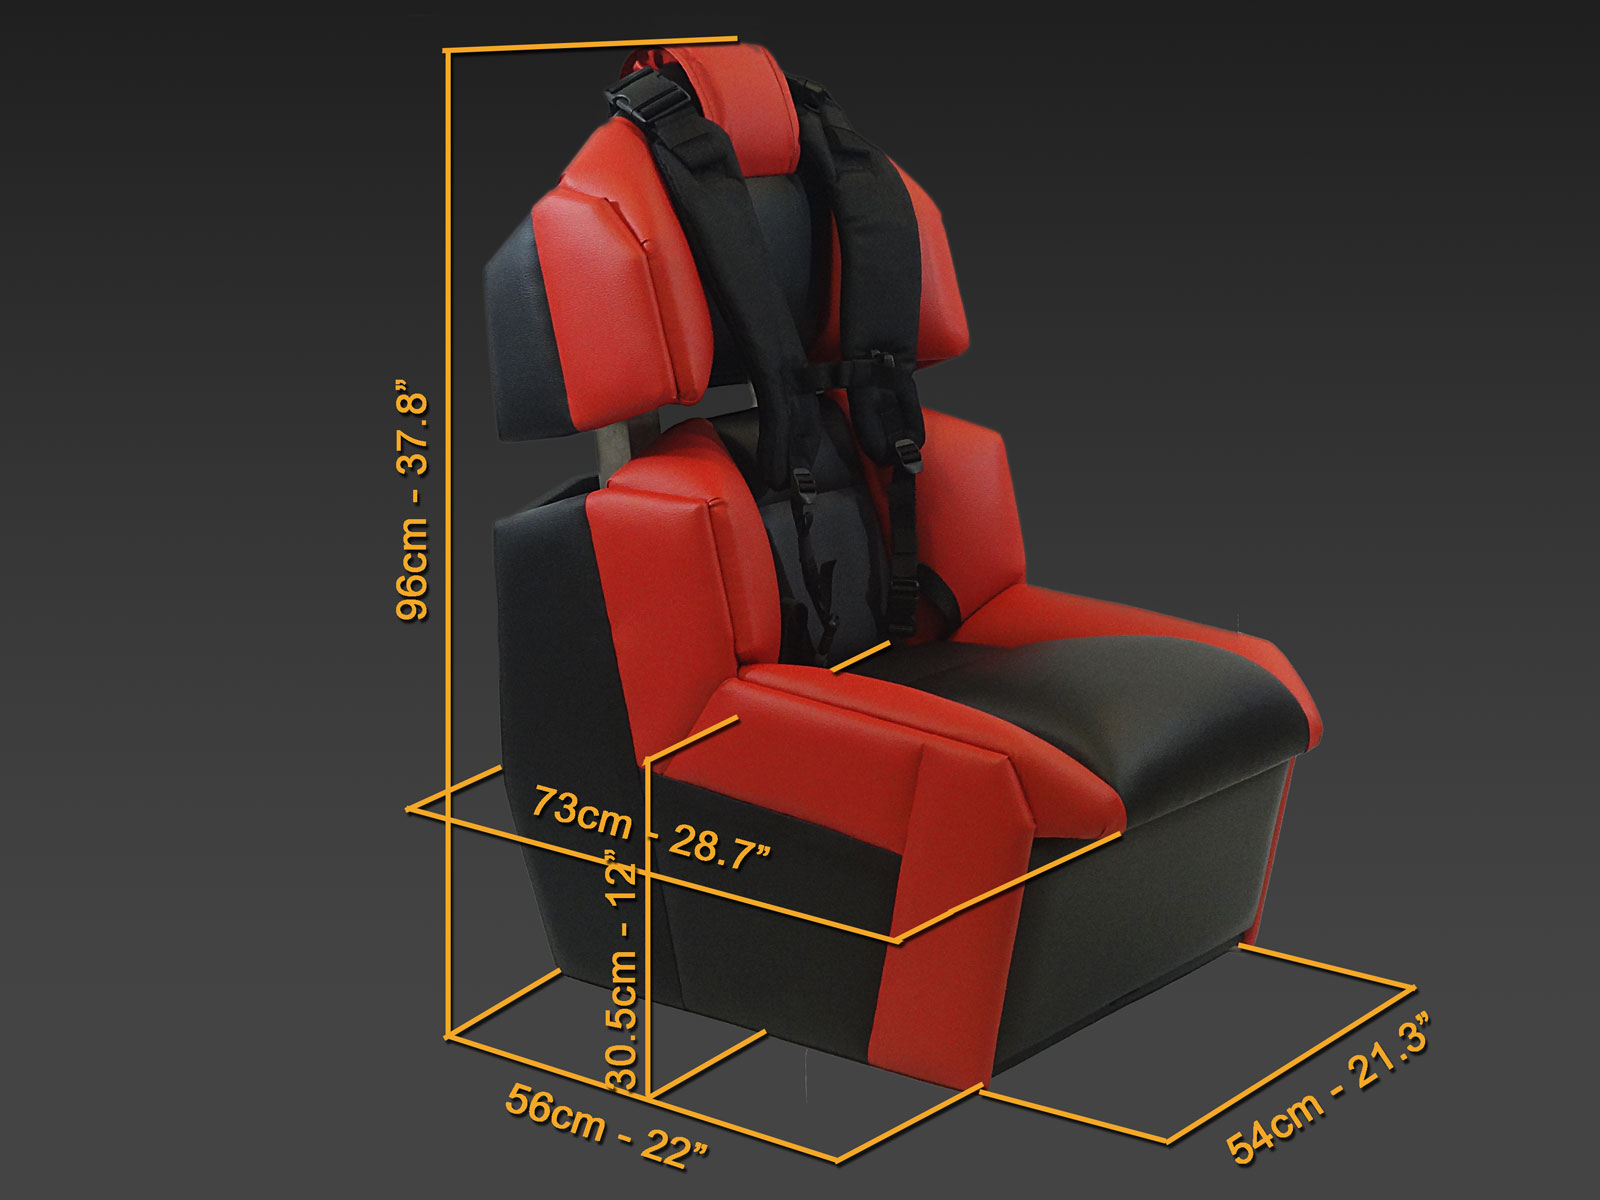 GS-Cobra motion simulator, view with dimensions in cm and inches